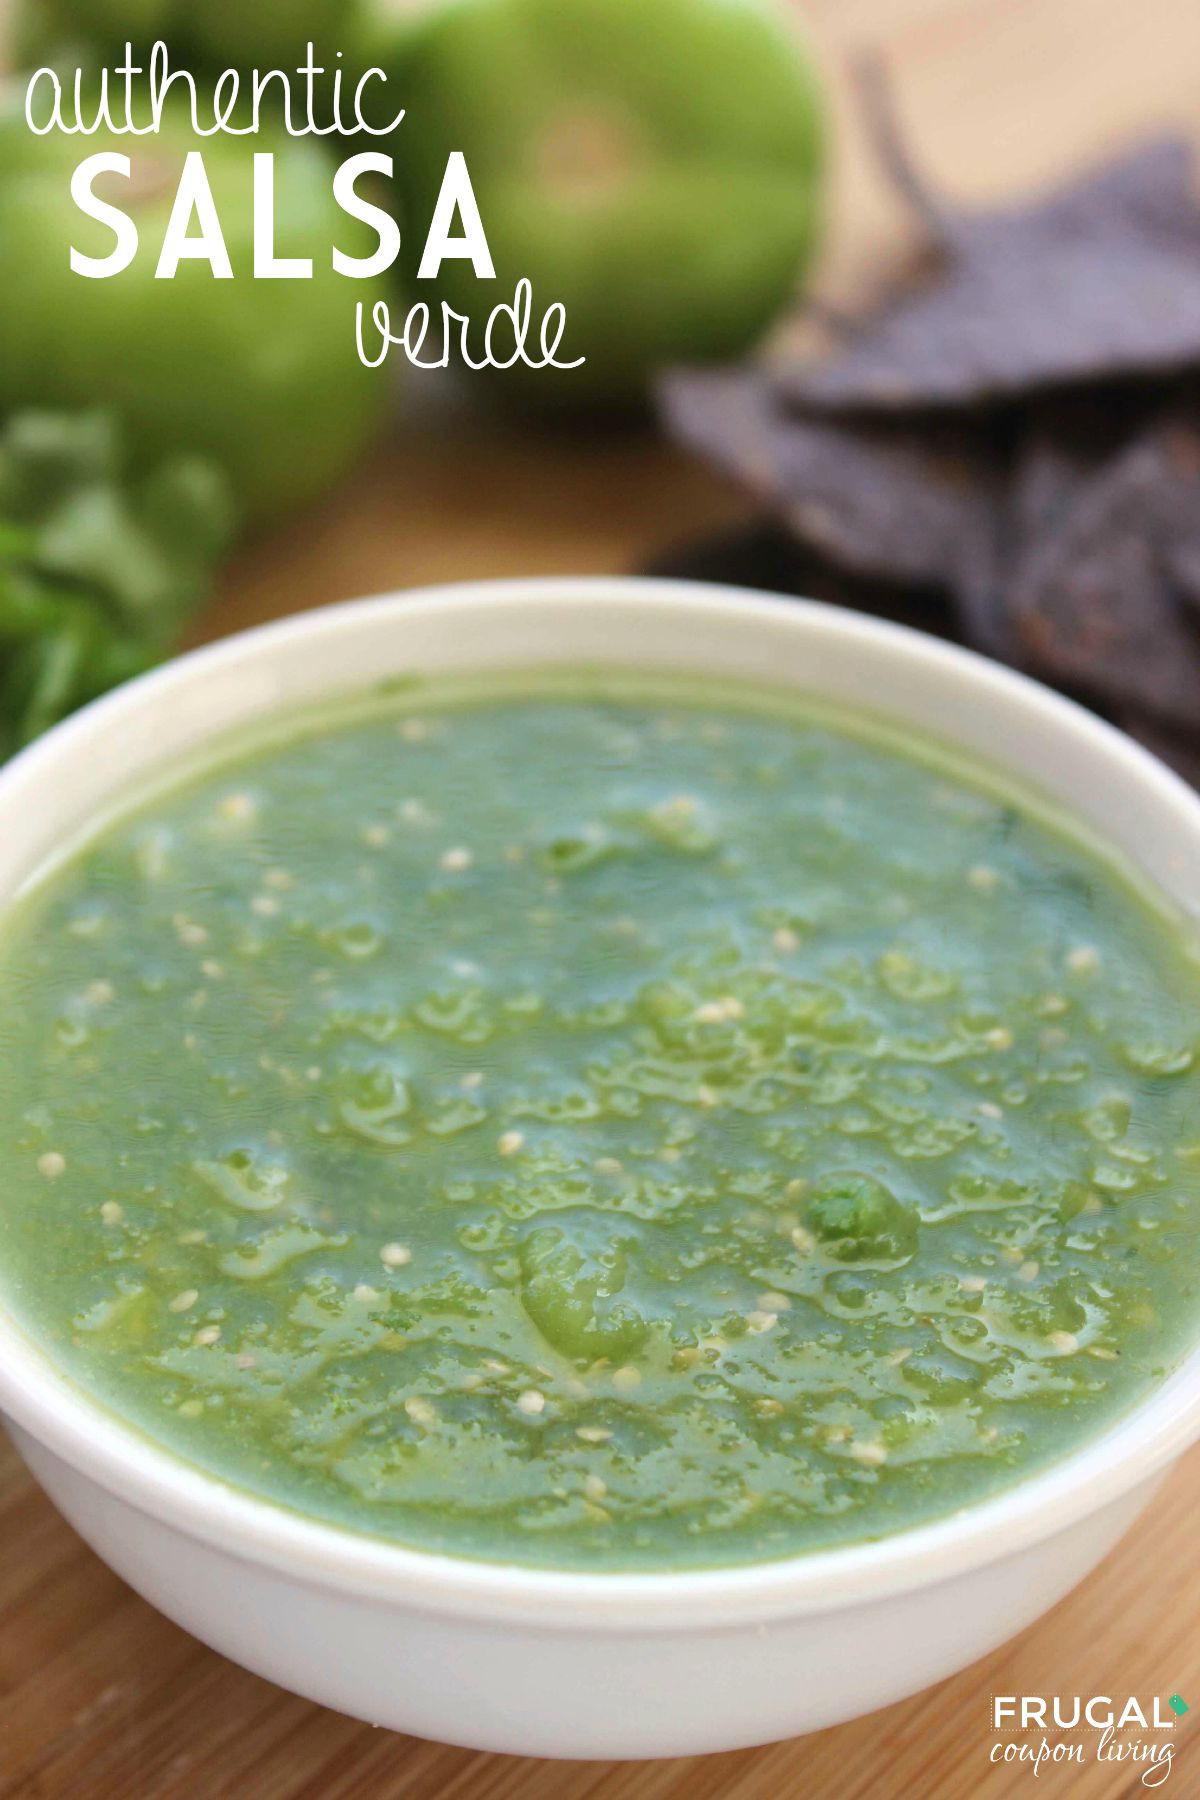 Authentic Salsa Verde Recipe For Canning
 Salsa Verde Authentic Mexican Salsa